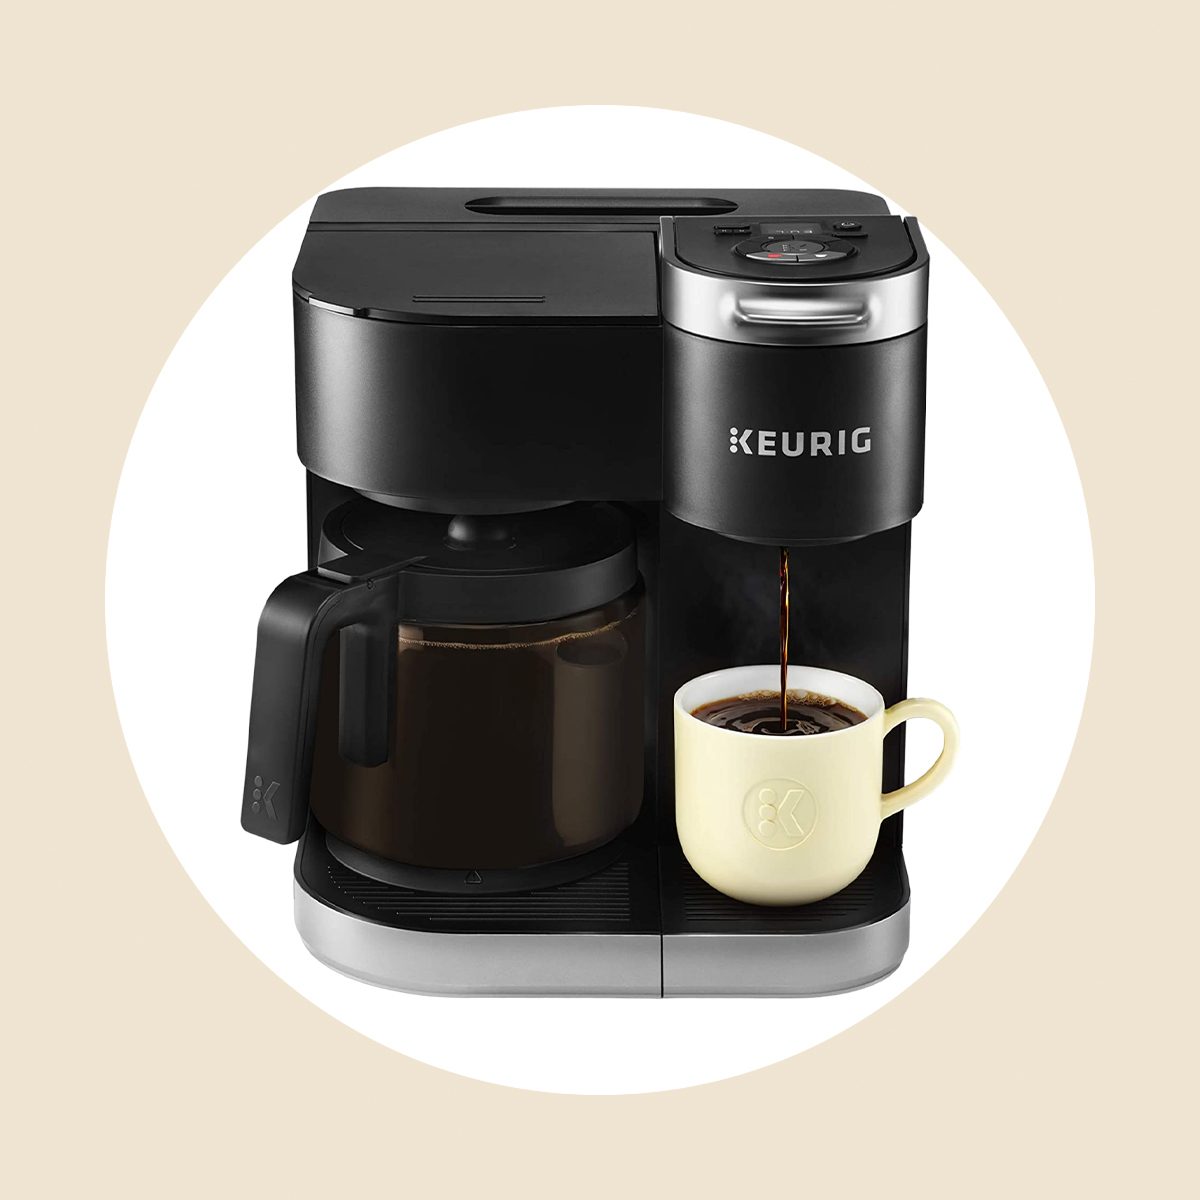 The (Excellent) Bruvi Coffee Maker is $100 Off